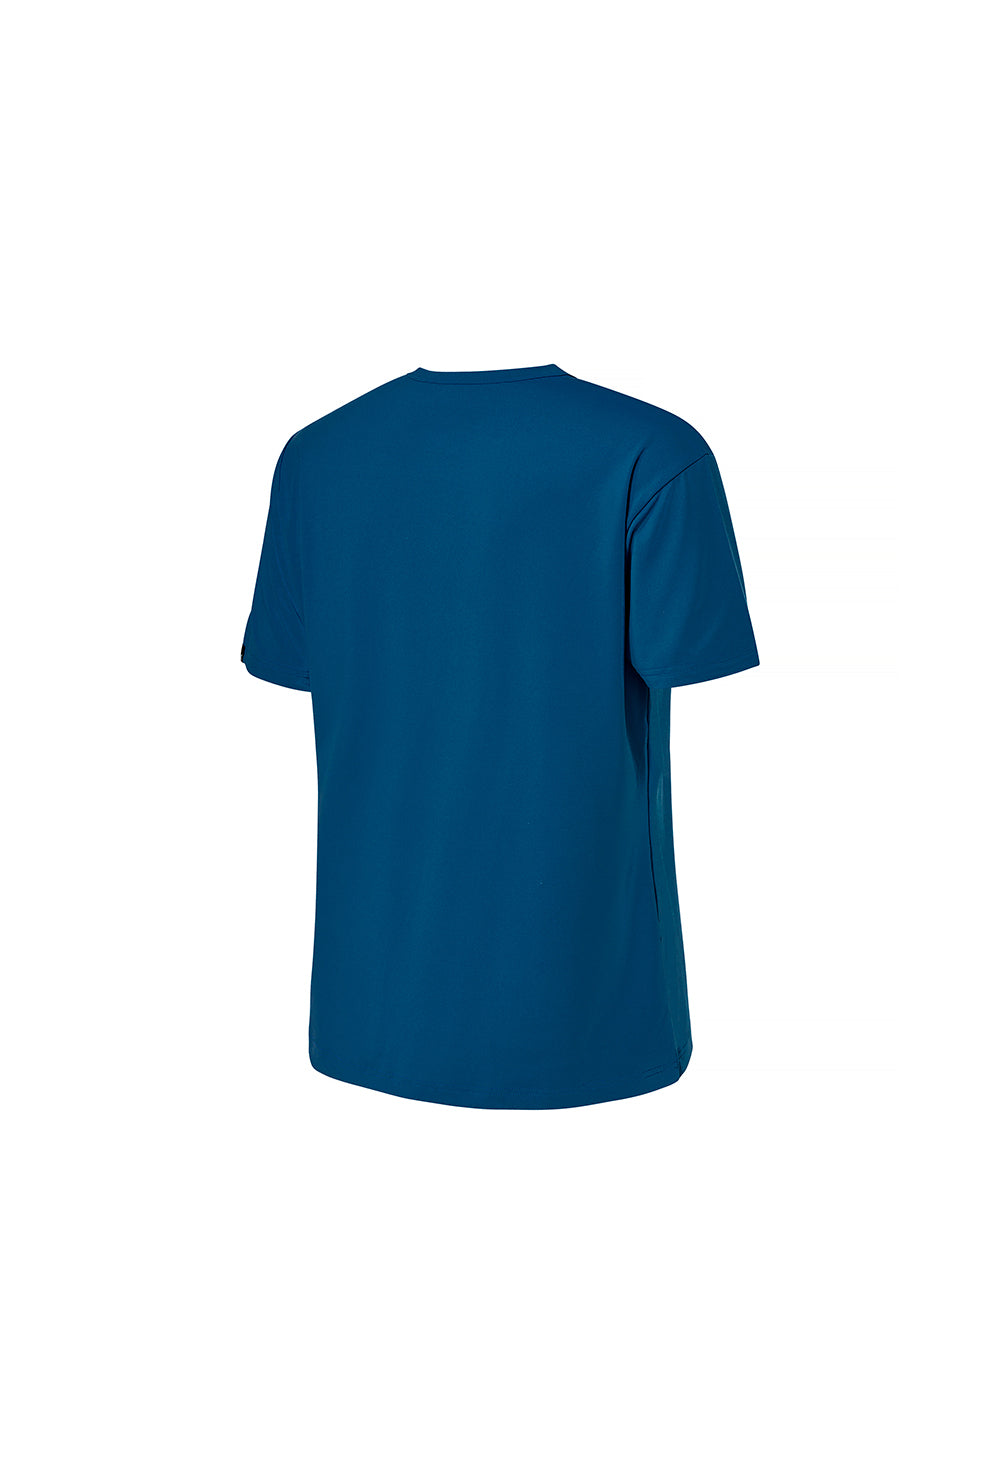 Men's Ice Feather Muscle Fit Short Sleeve - Rivera Blue